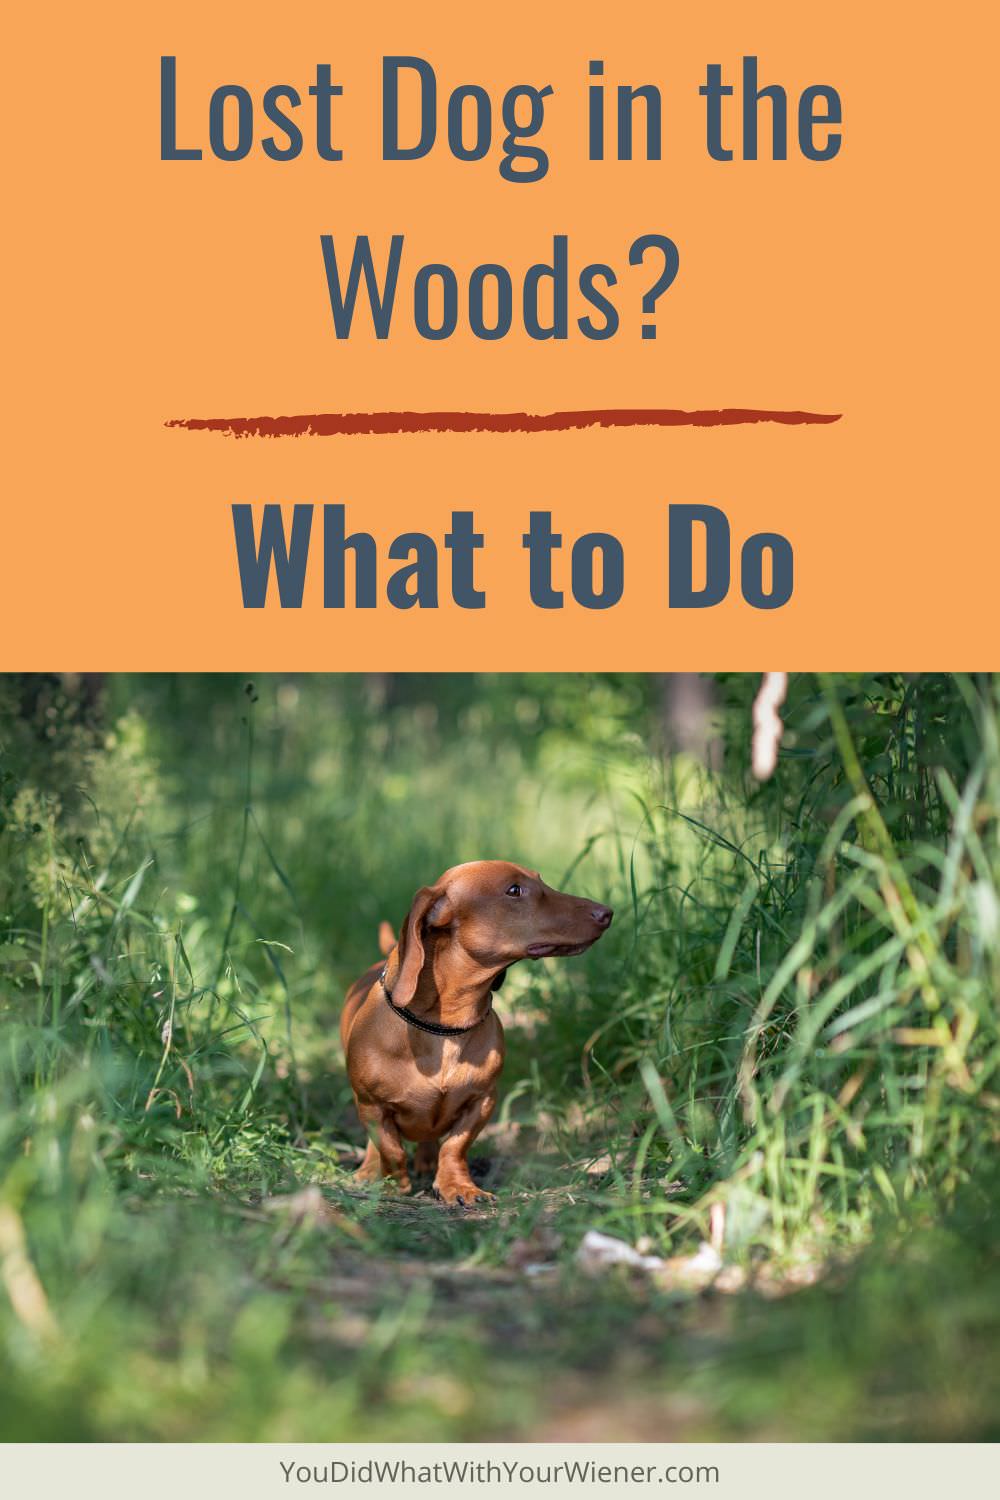 Do you know what to do if your dog gets lost in the woods? Here's what to keep in mind before you venture out next time.